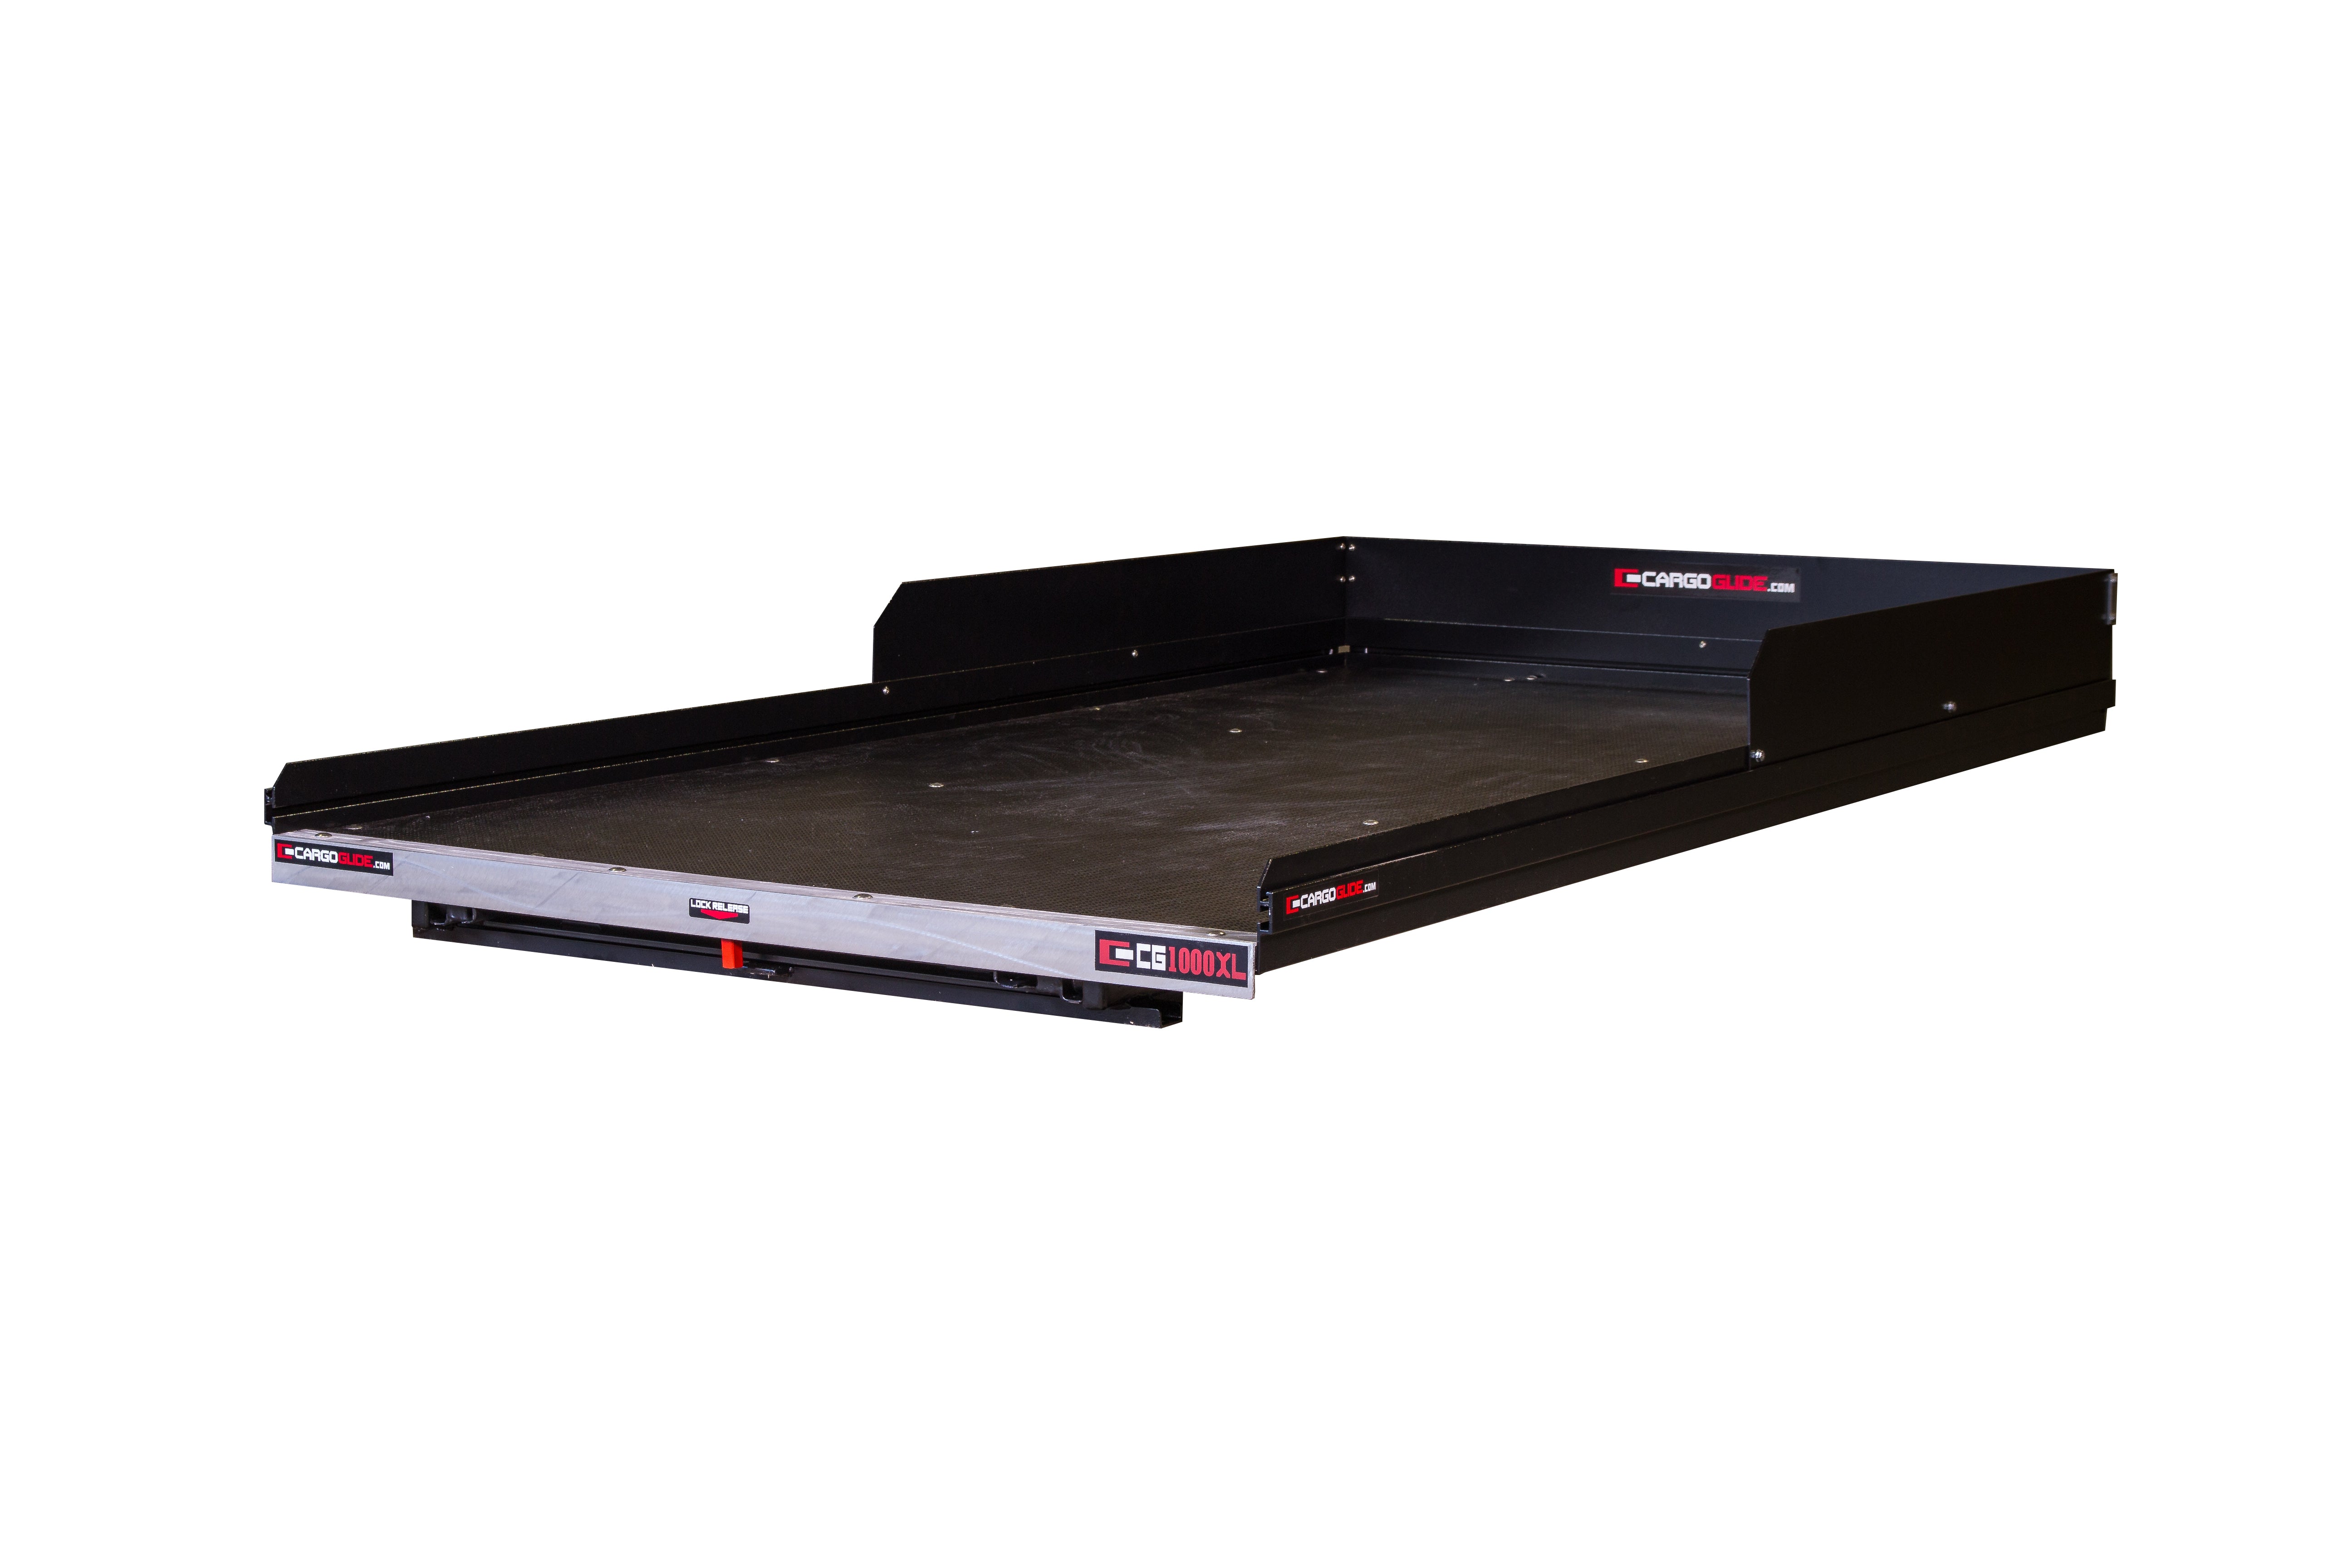 CargoGlide CG1000XL Slide out Truck Bed Tray - 1000 lb Capacity 100% Extension